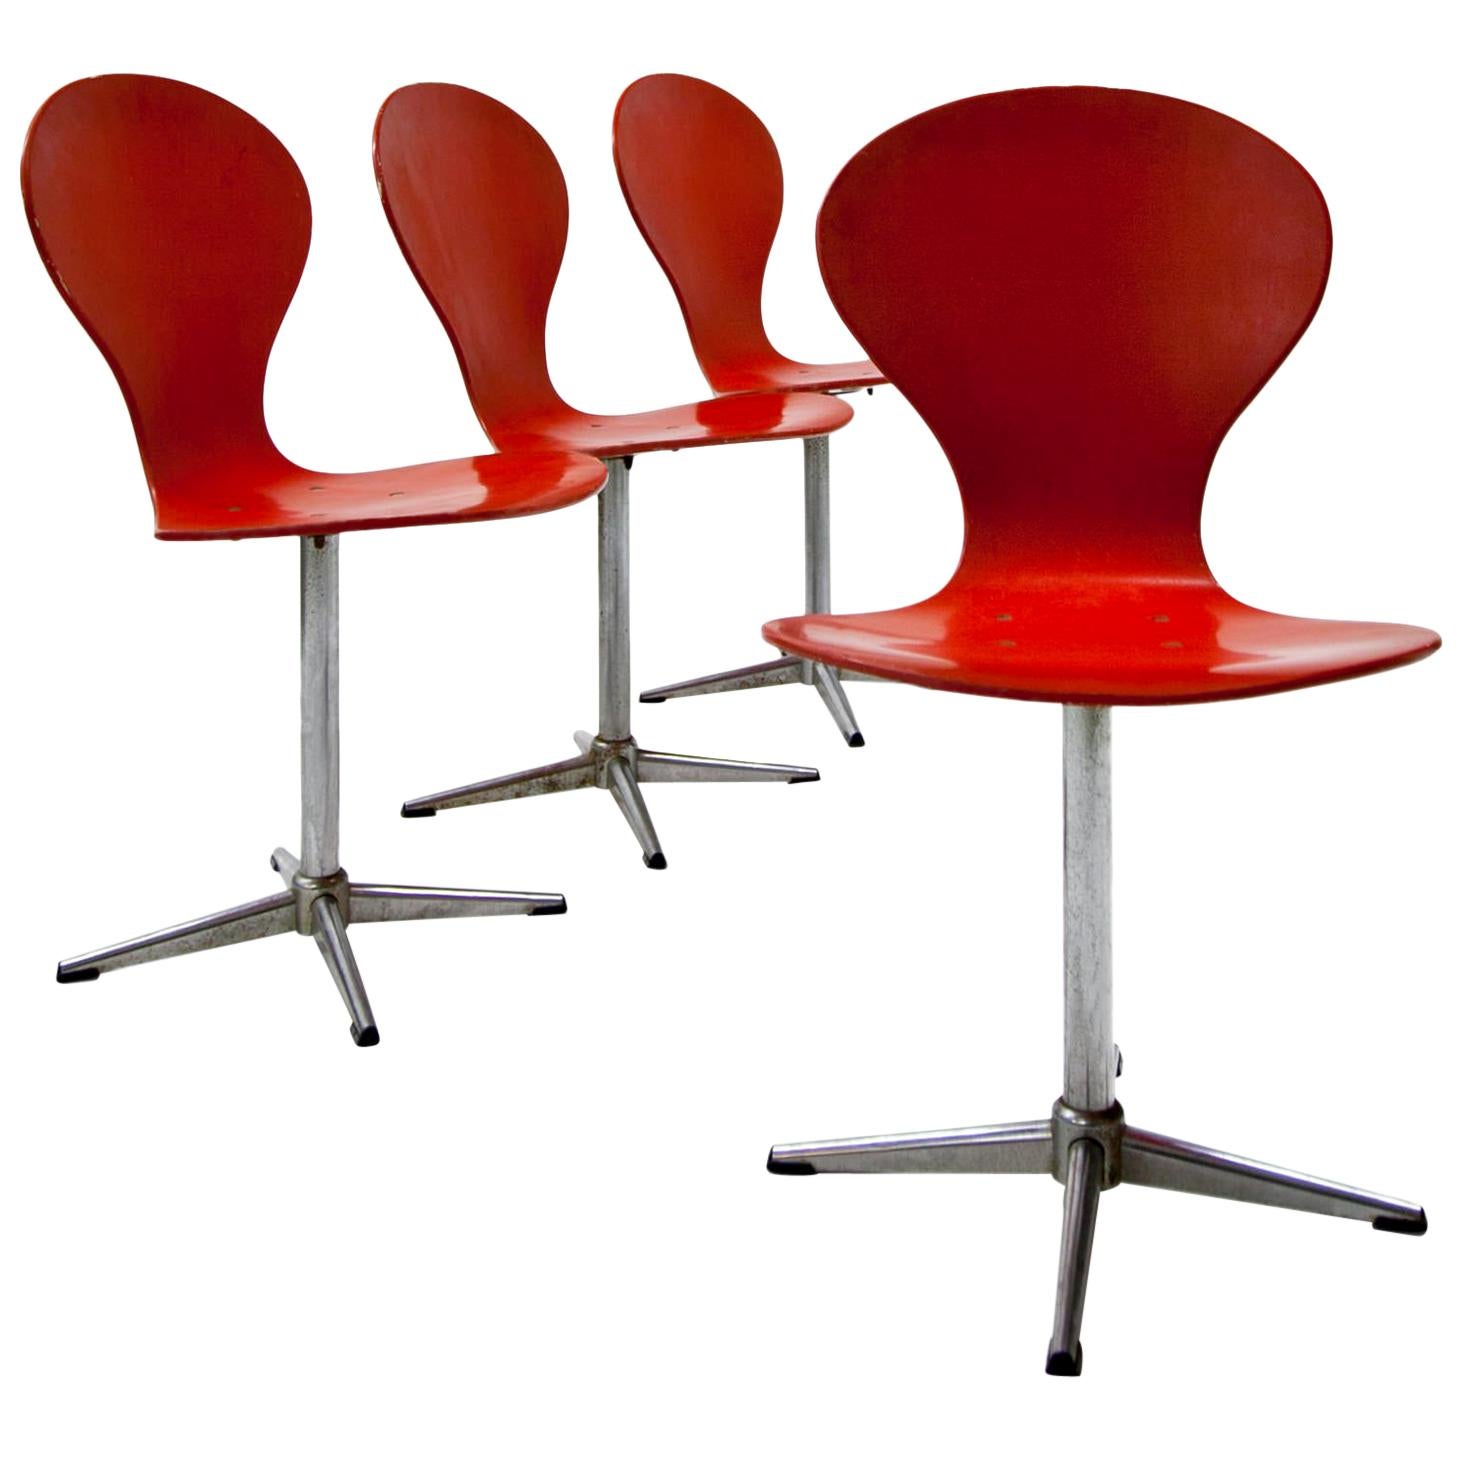 Swivel Chairs by Benze, 1960s